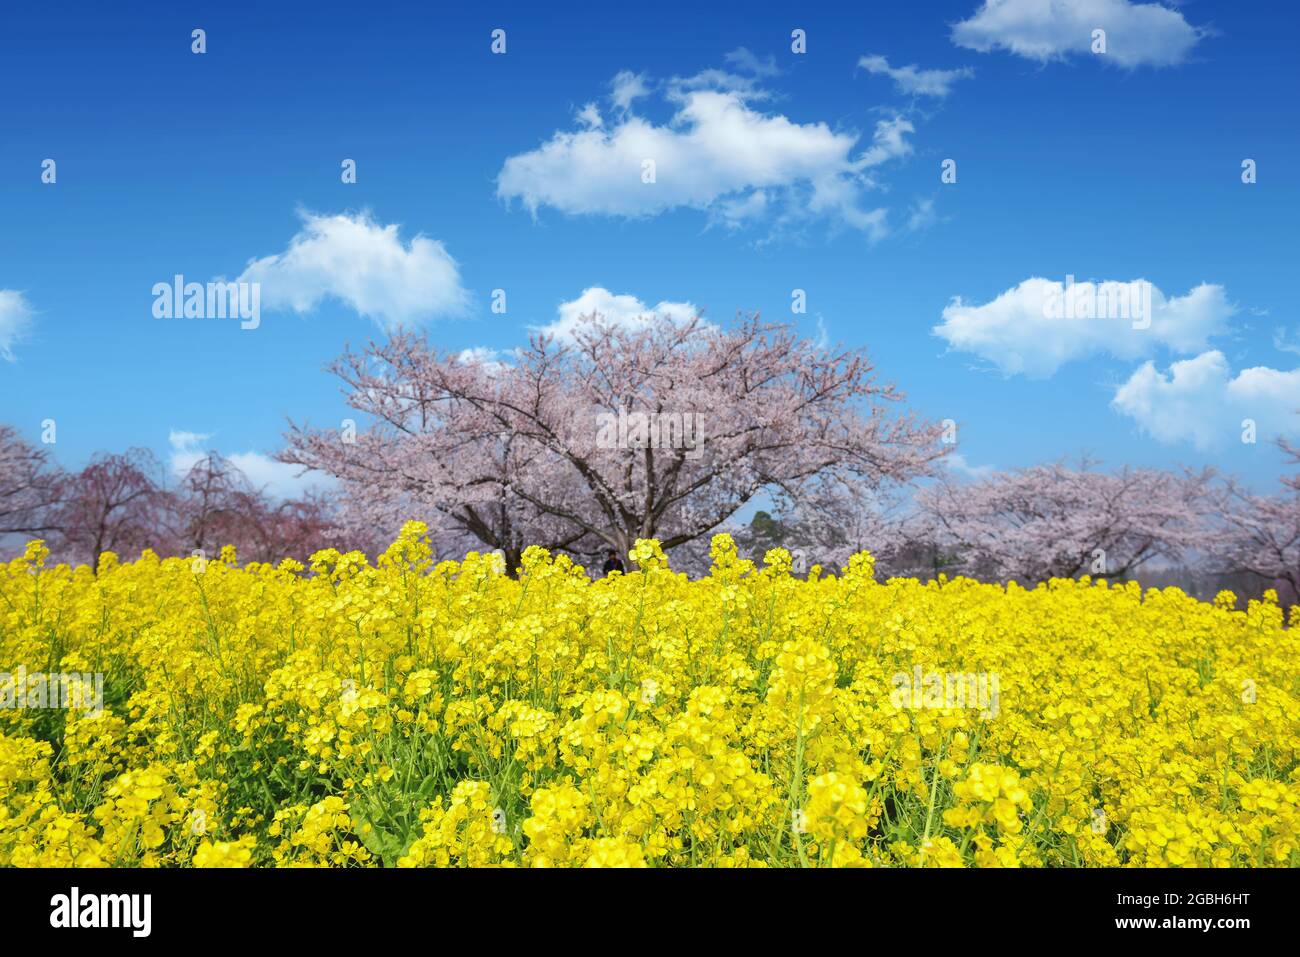 Cherry blossom trees and a meadow of yellow flowers in springtime, Tokyo, Honshu, Japan Stock Photo